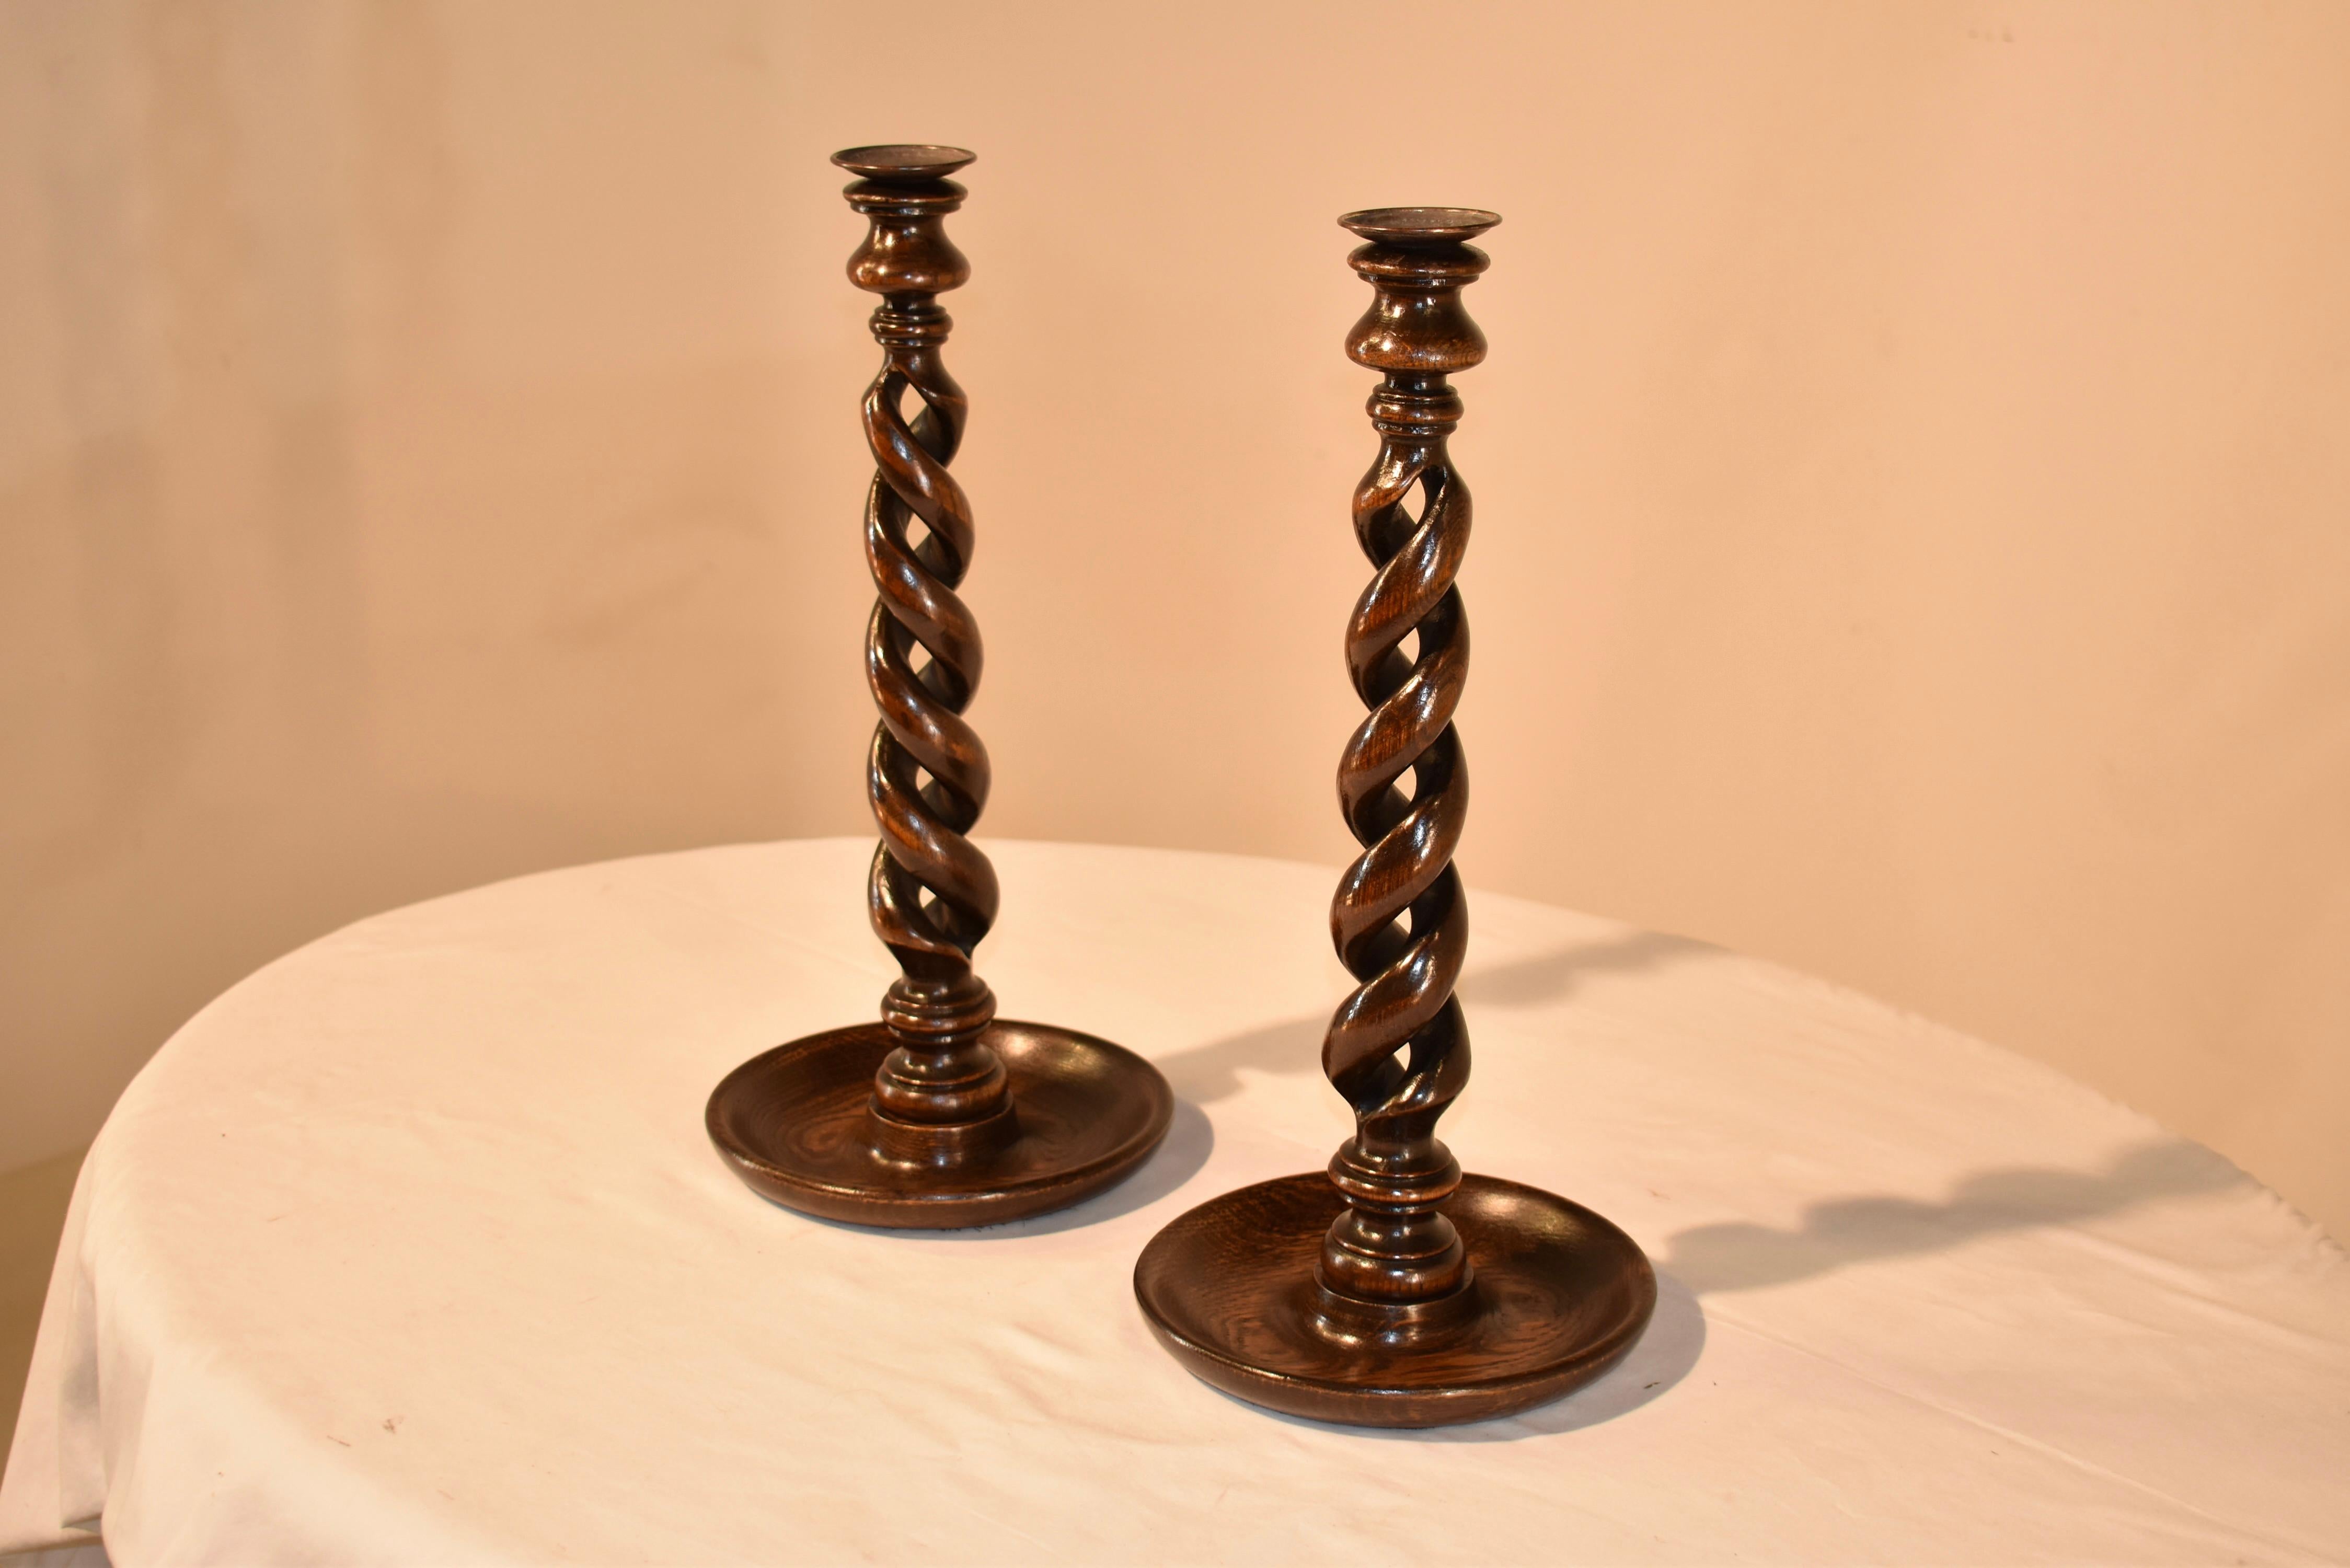 Turned Pair of 19th Century Tall English Candlesticks For Sale